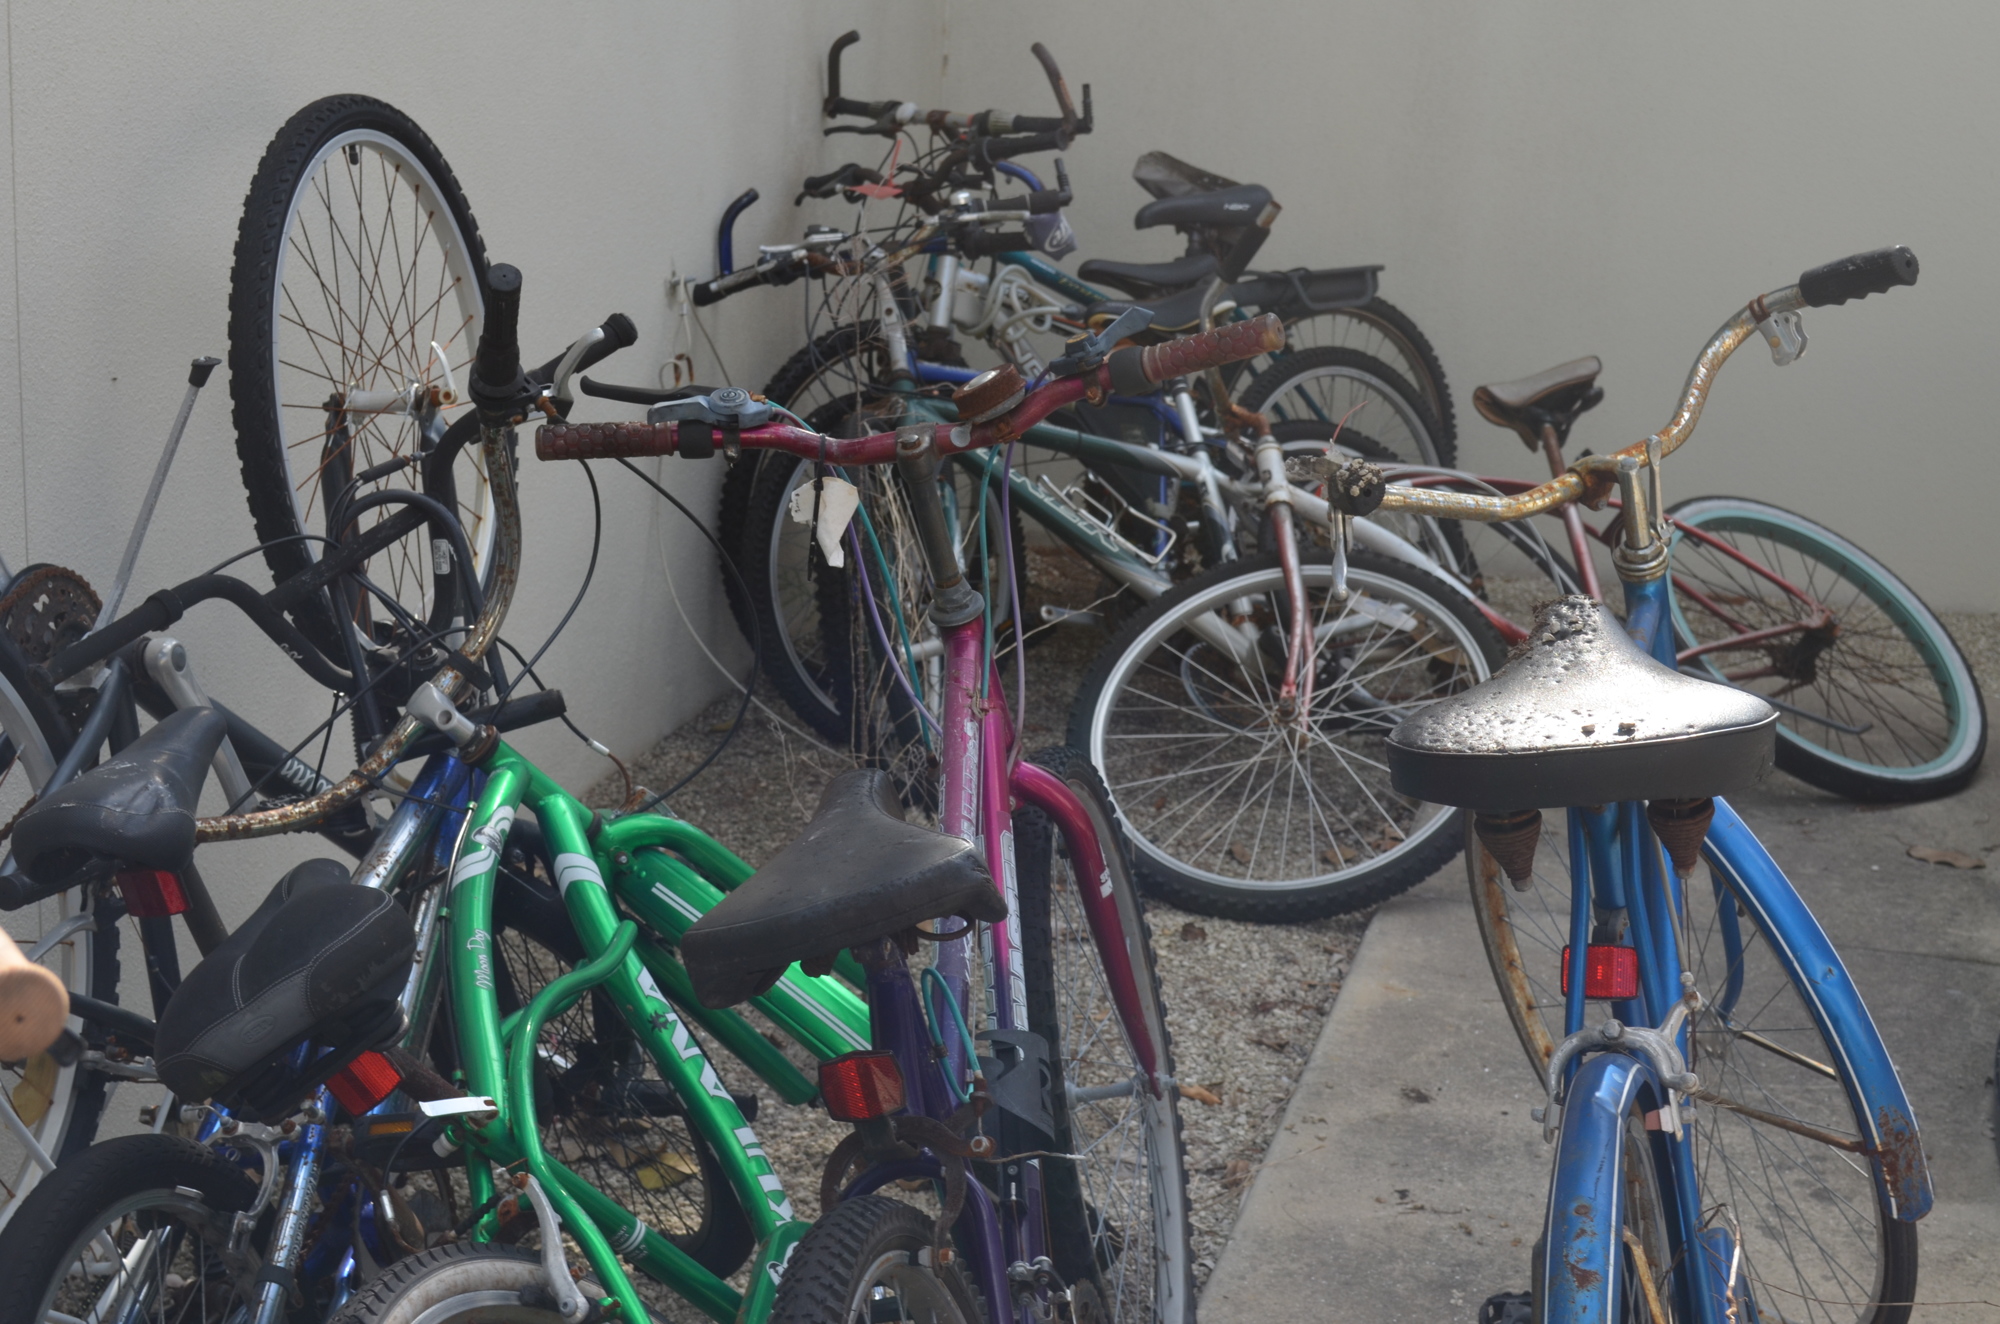 More than a dozen bikes have been turned into the Longboat Key Police Department. Terry O'Connor